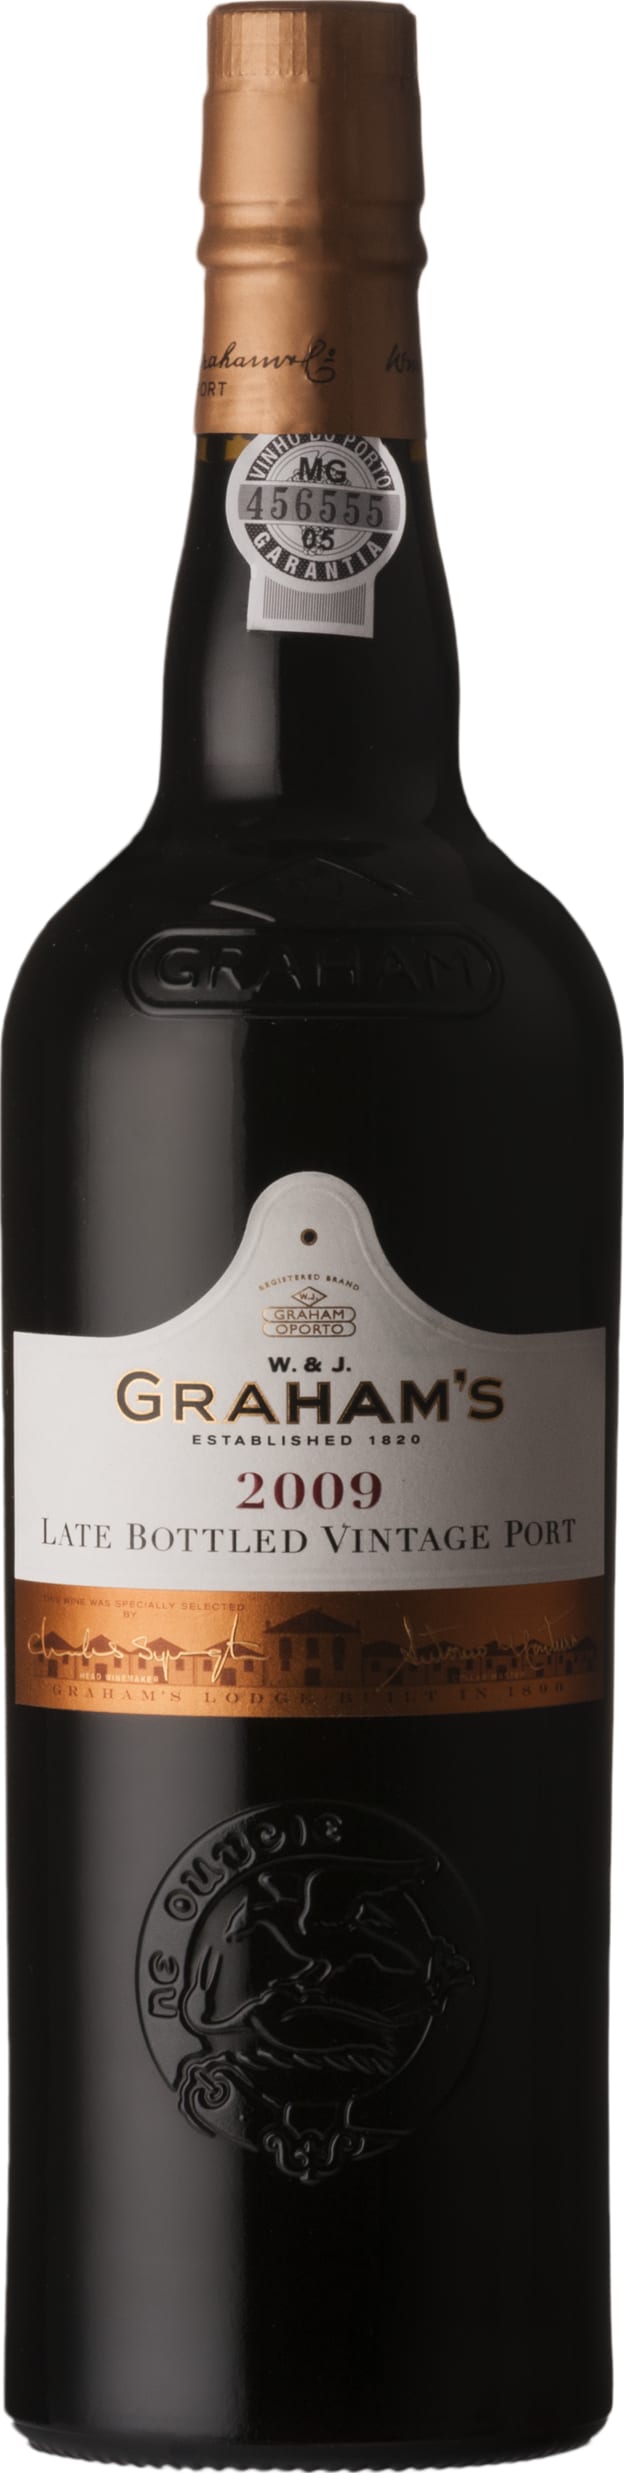 Graham's Late Bottled Vintage 2017 75cl - Buy Graham's Wines from GREAT WINES DIRECT wine shop